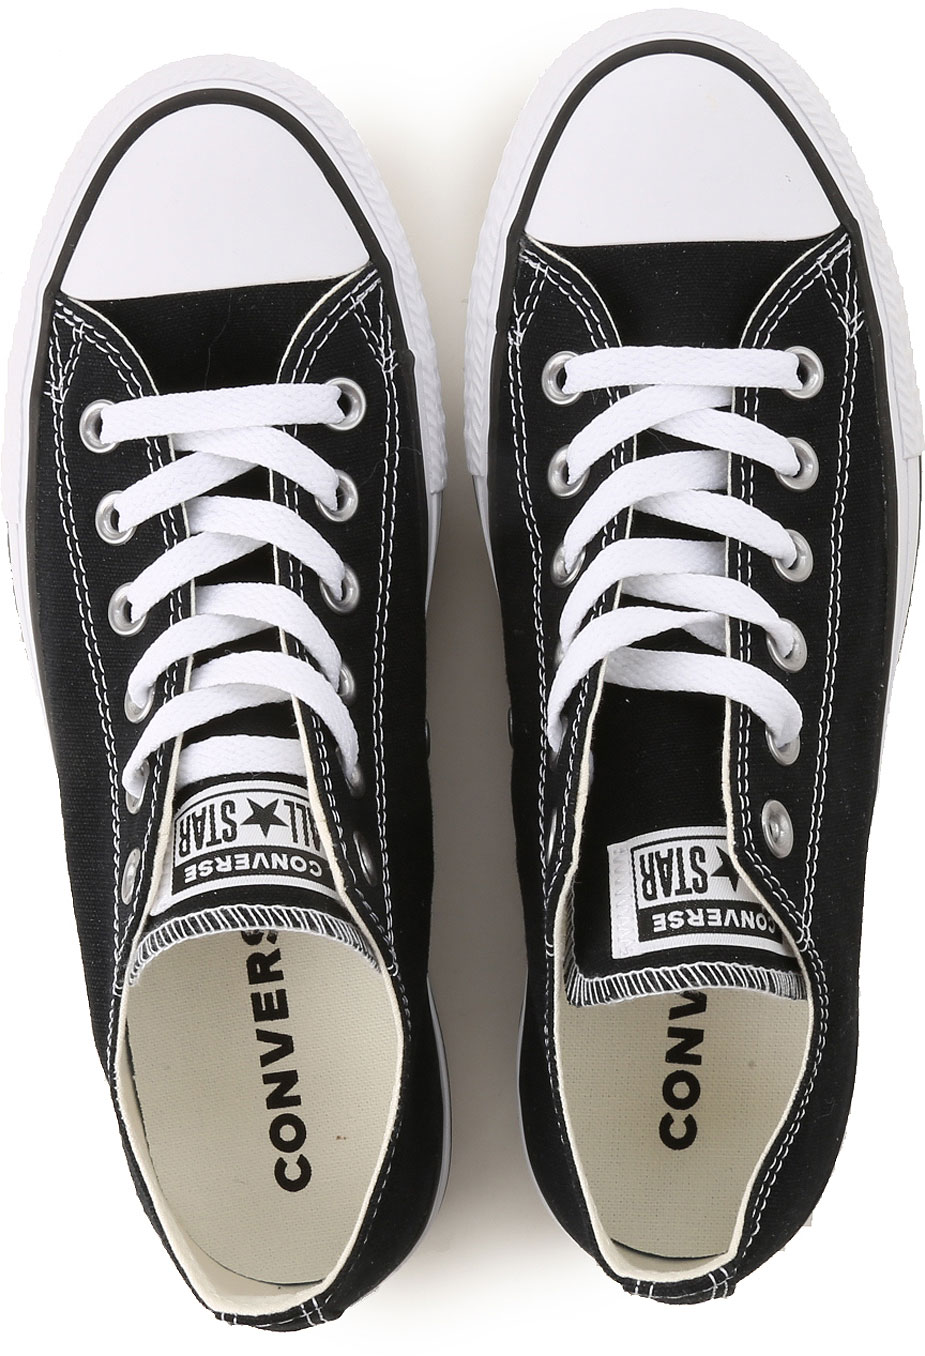 Womens Shoes Converse Style Code 563970c 034